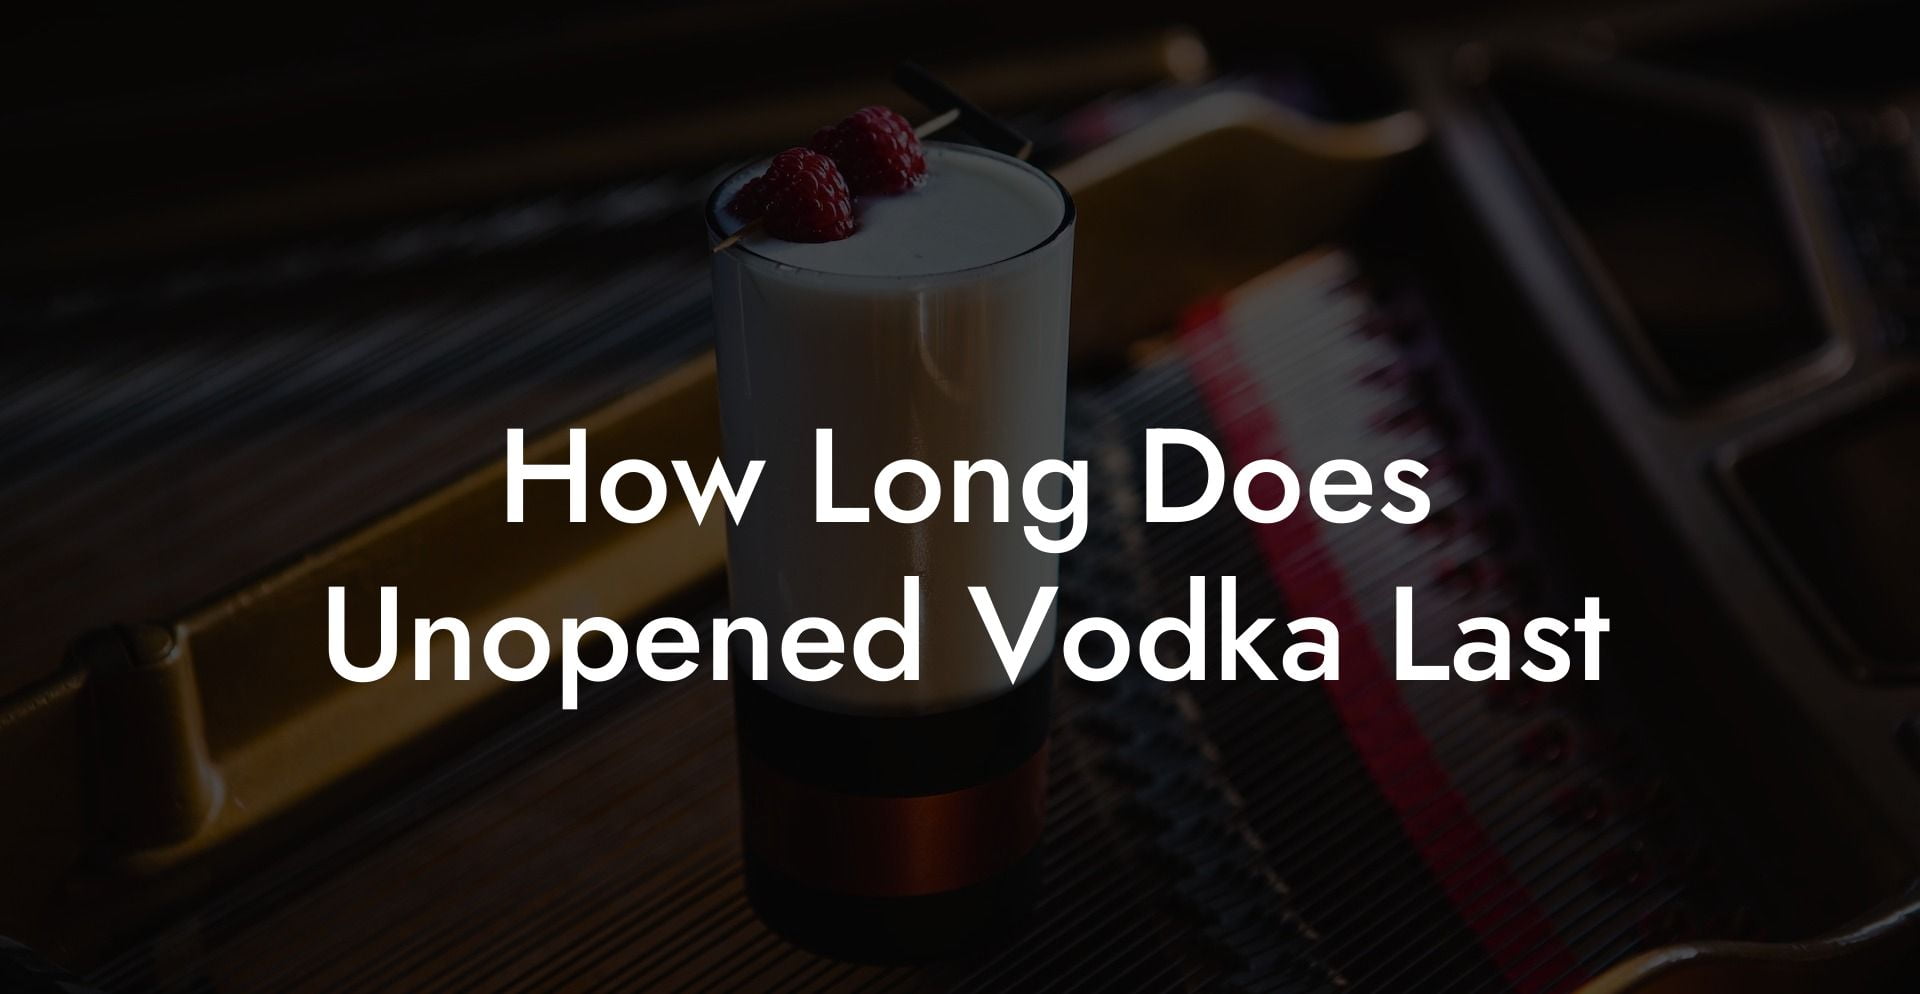 How Long Does Unopened Vodka Last